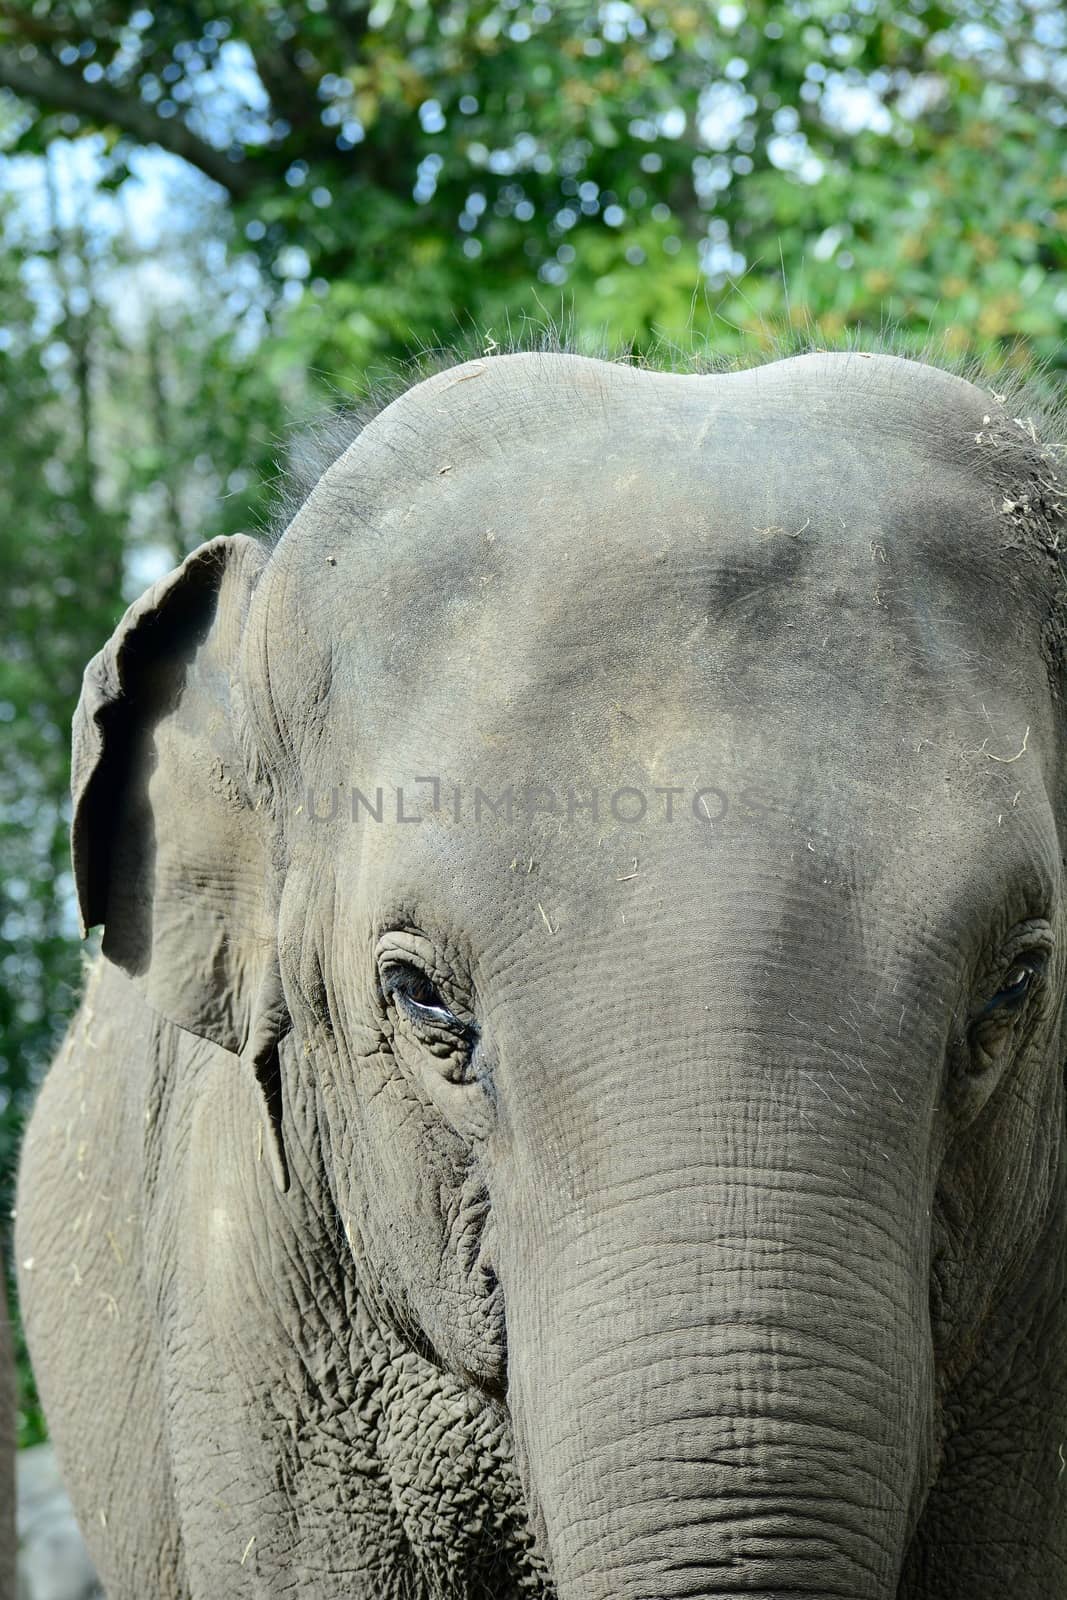 A close-up portrait of an Asian elephant (Elephas maximus), showing texture of the animal's skin by Marshalkina